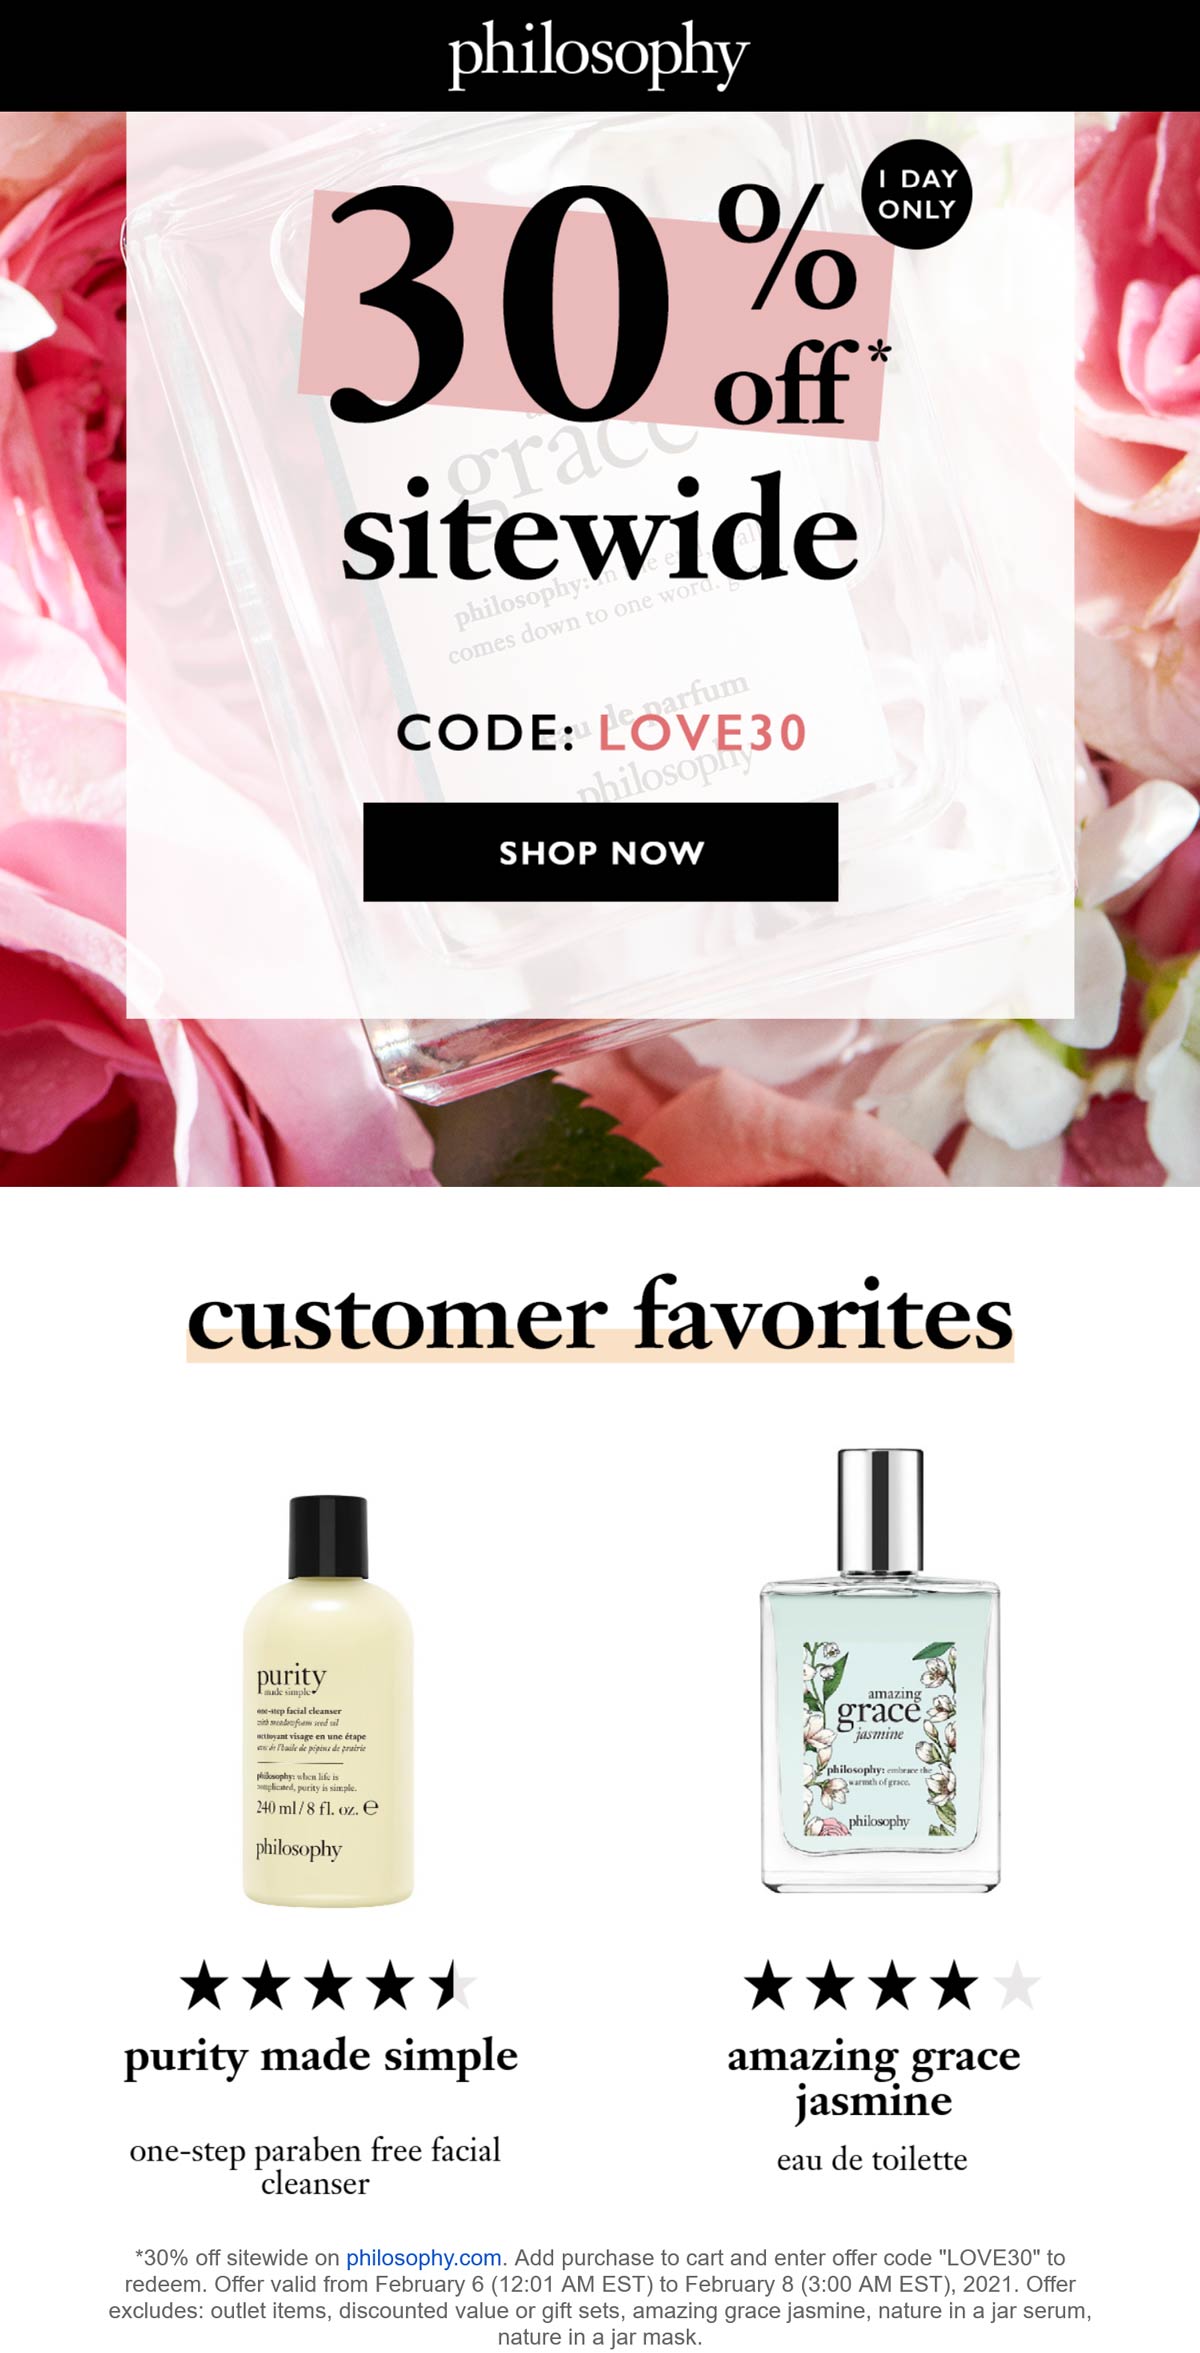 Philosophy stores Coupon  30% off everything online at Philosophy cosmetics via promo code LOVE30 #philosophy 